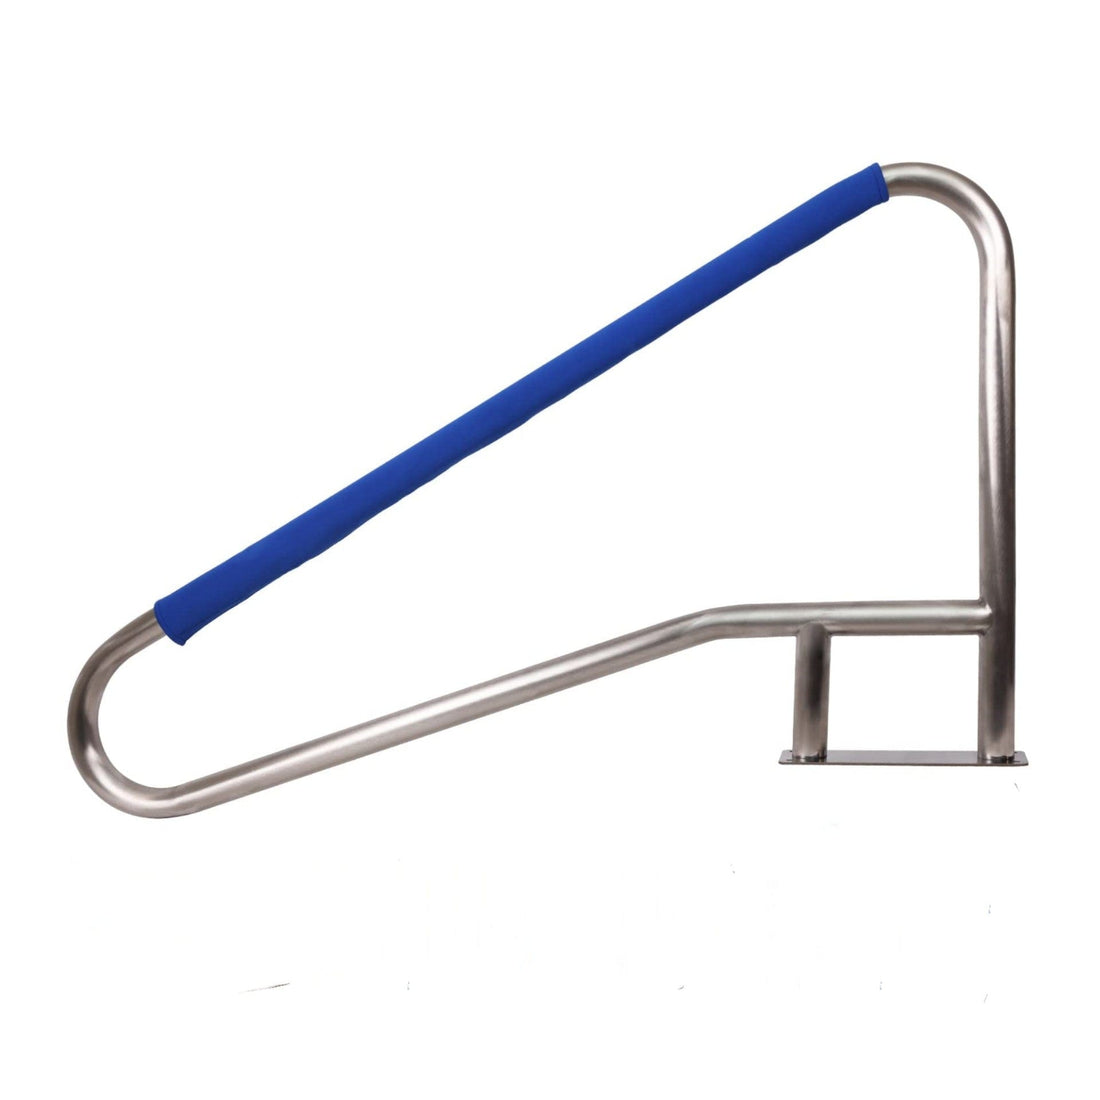 1pack 54x36 Inch Pool Handrail for Inground Pool, 250LBS Load